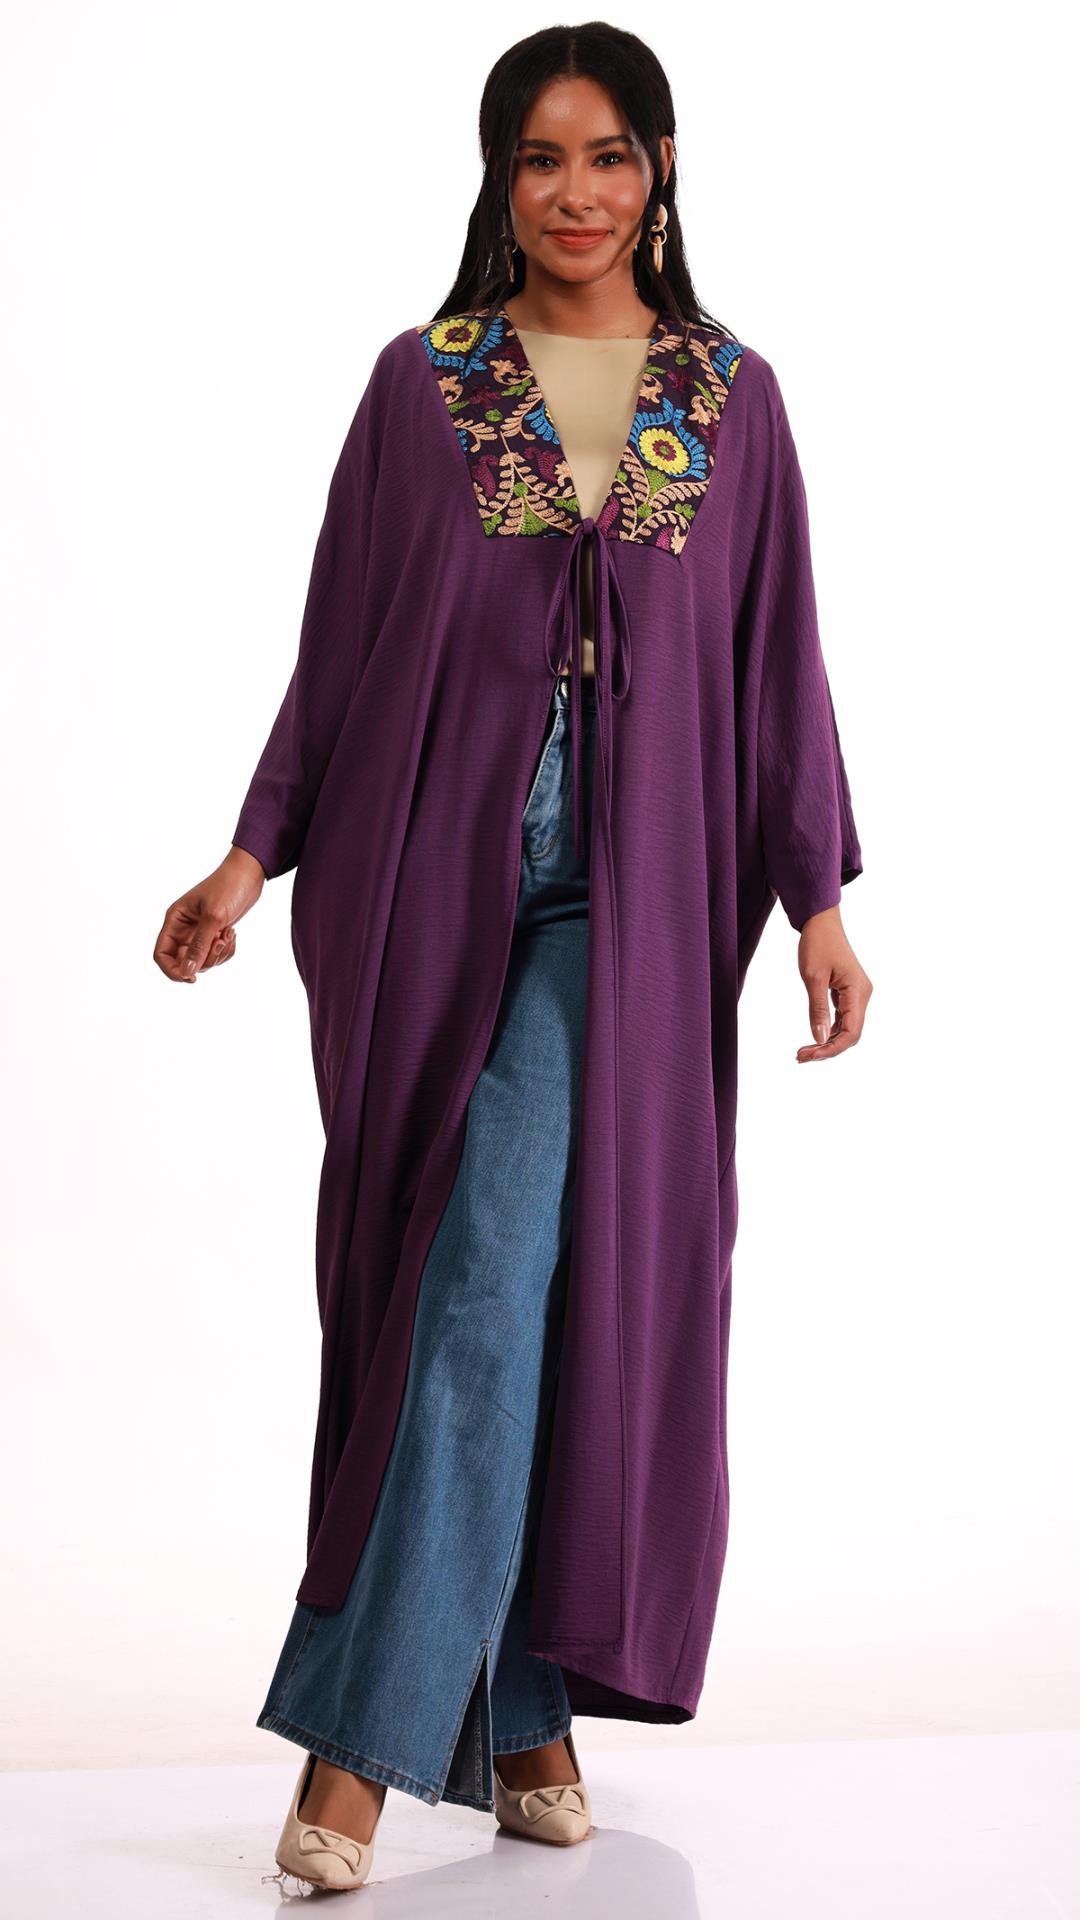 Embroidered cape at chest and back